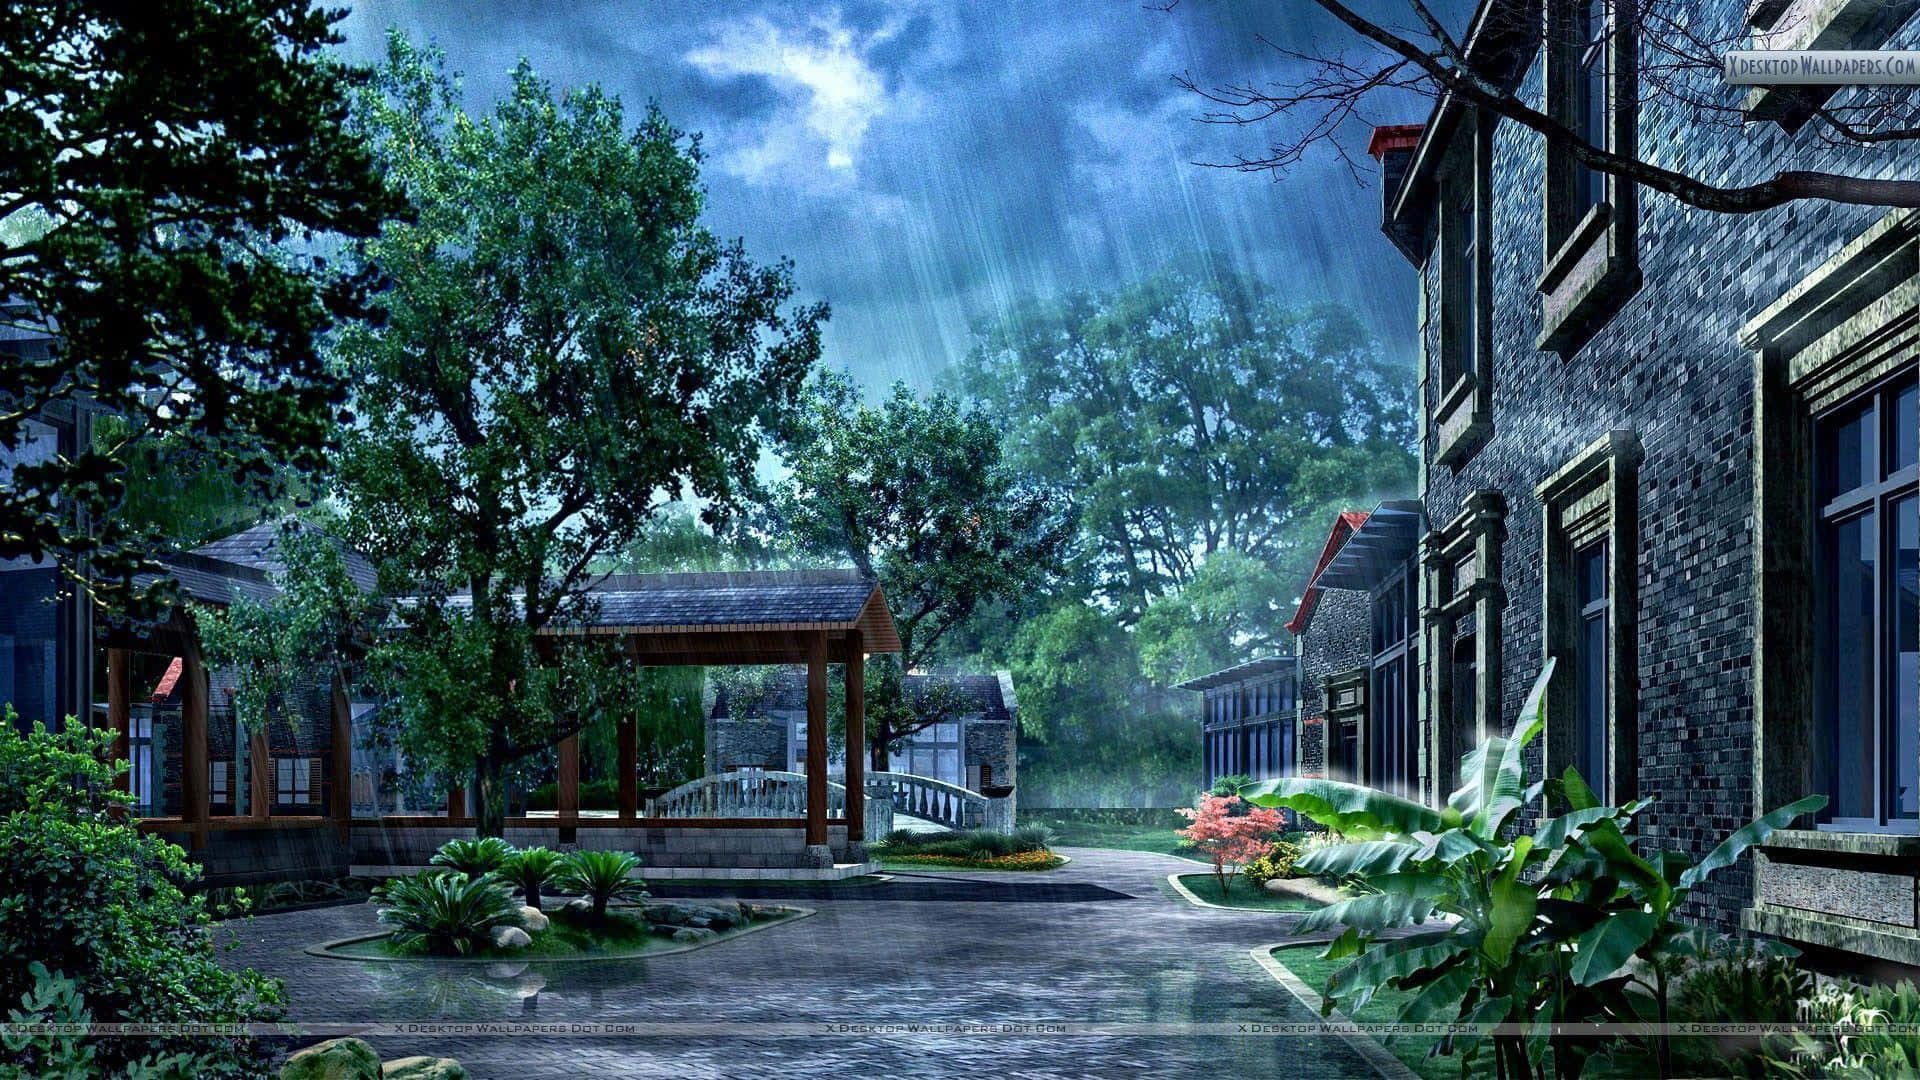 Fancy House Garden During Rainy Day Picture